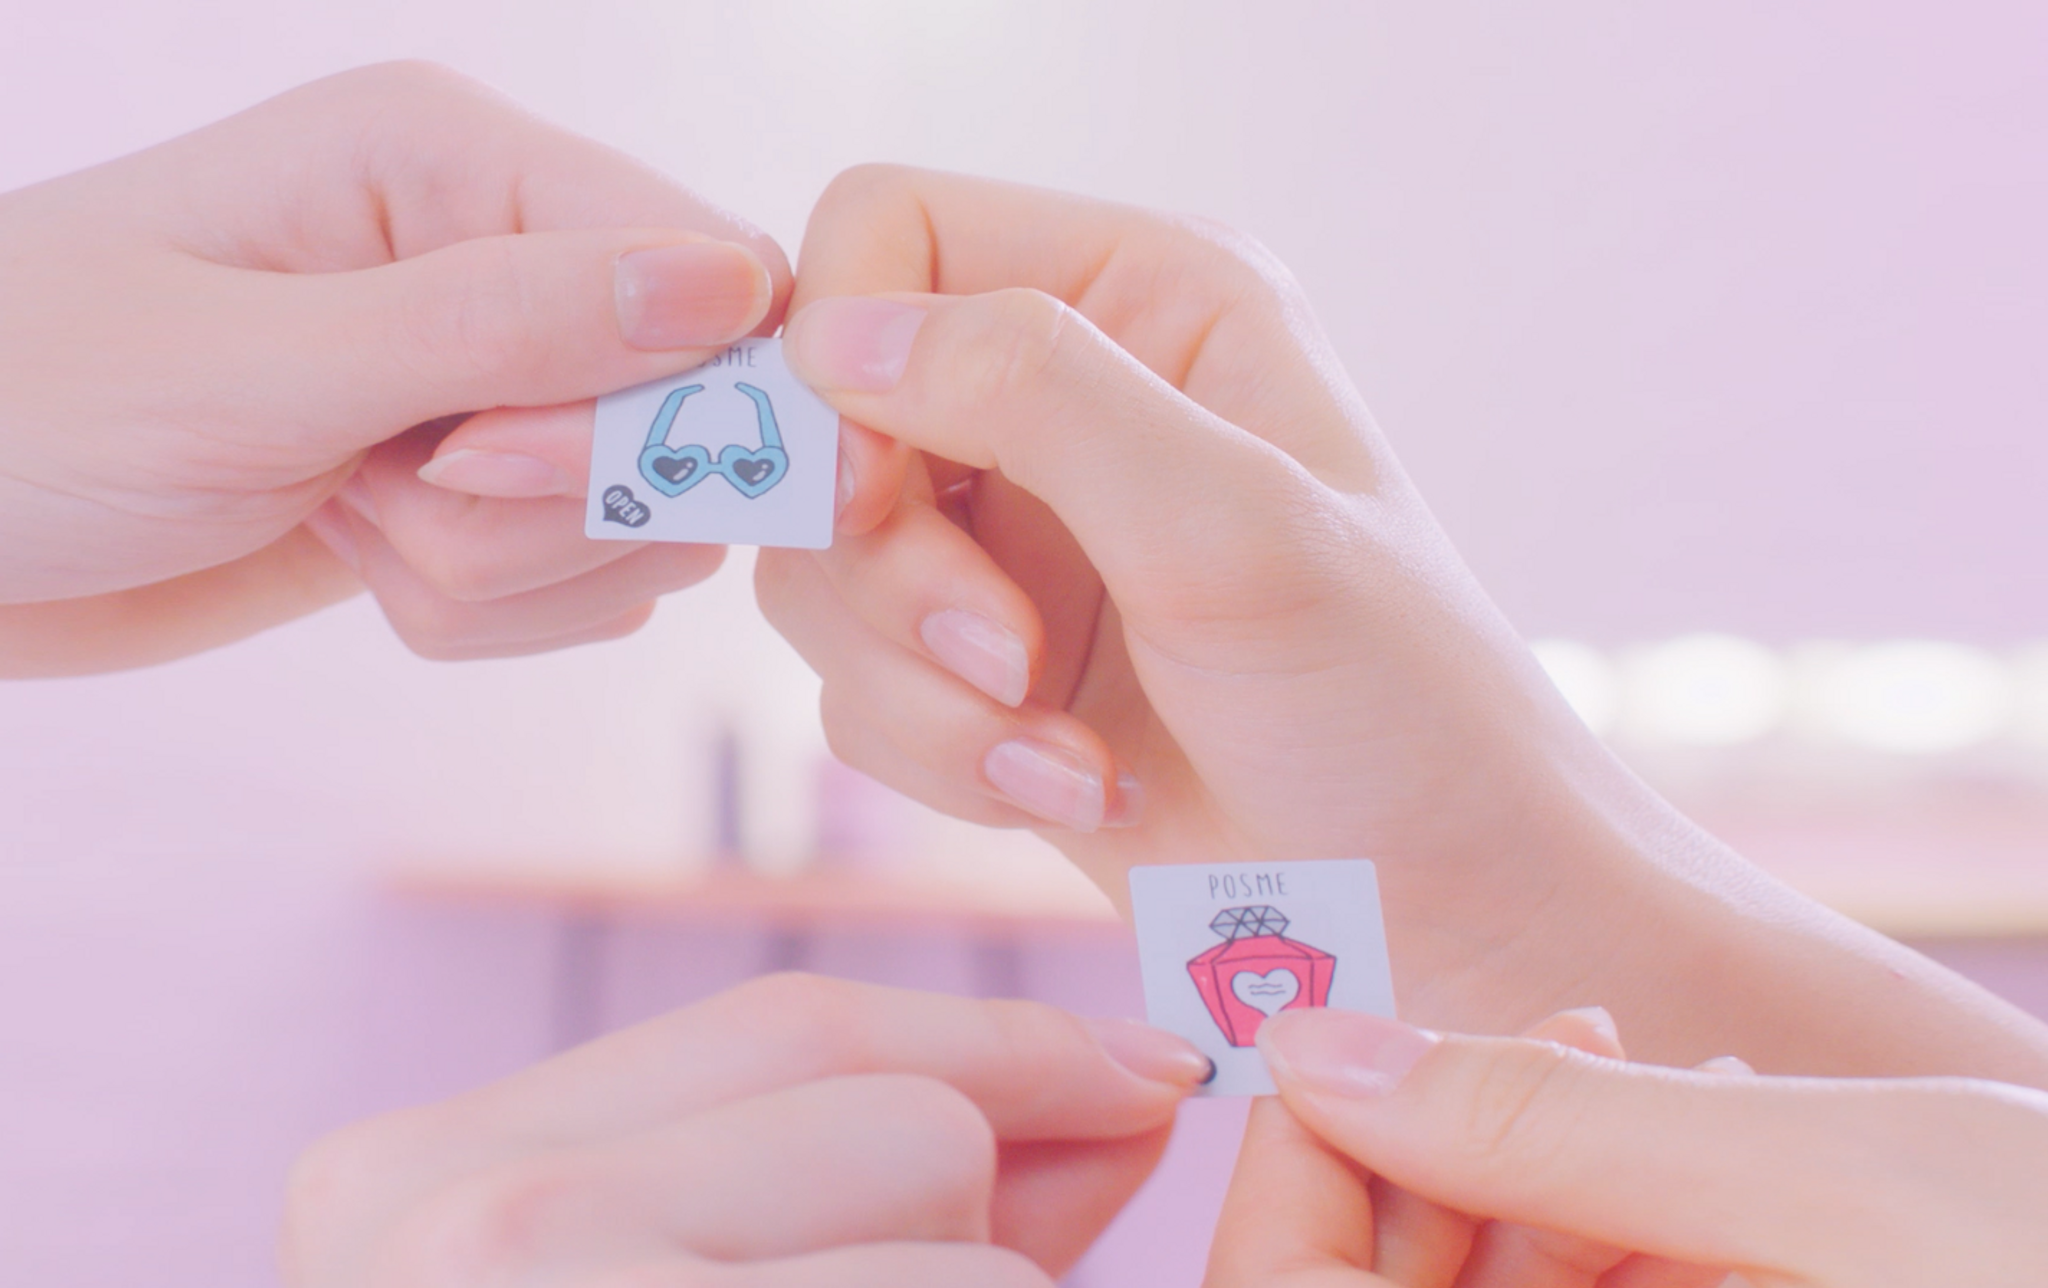 Shiseido collaborates with teen girls to design make-up